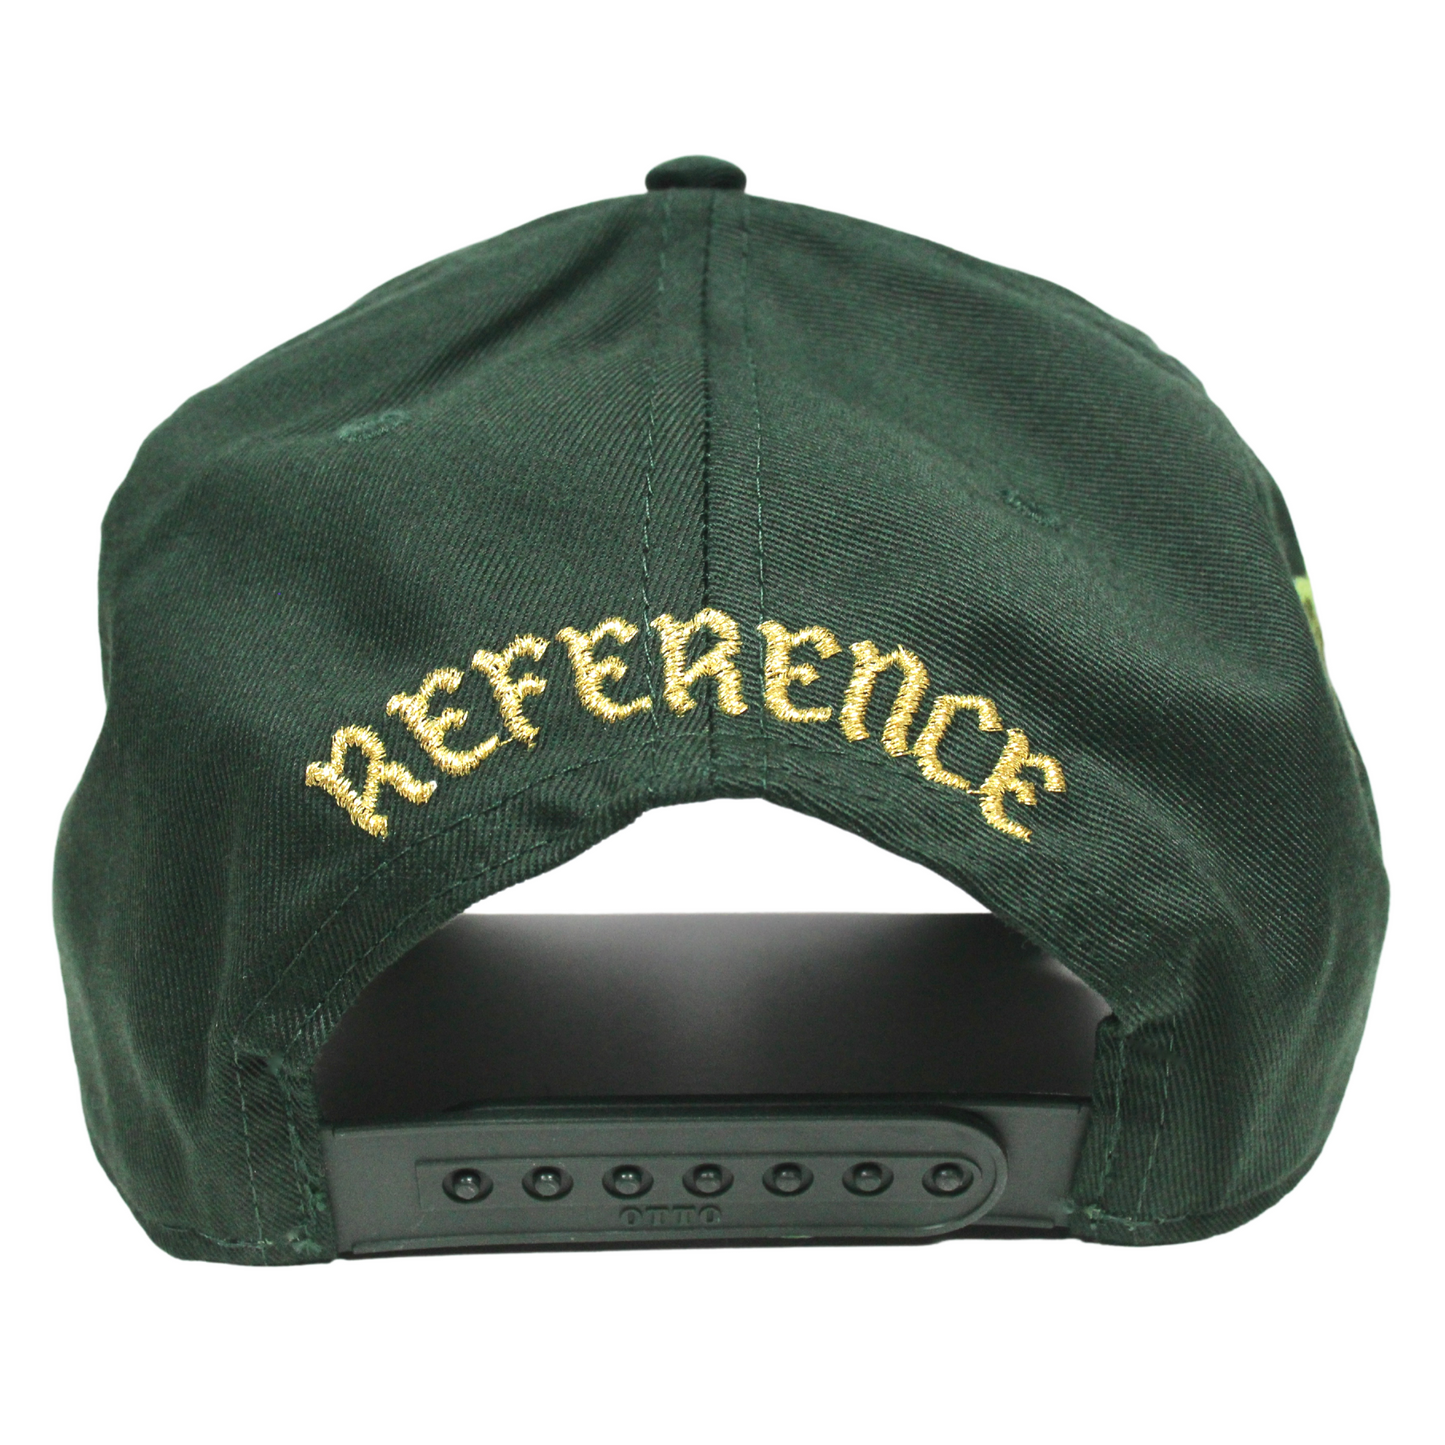 Reference LA Cap (Forest Green)